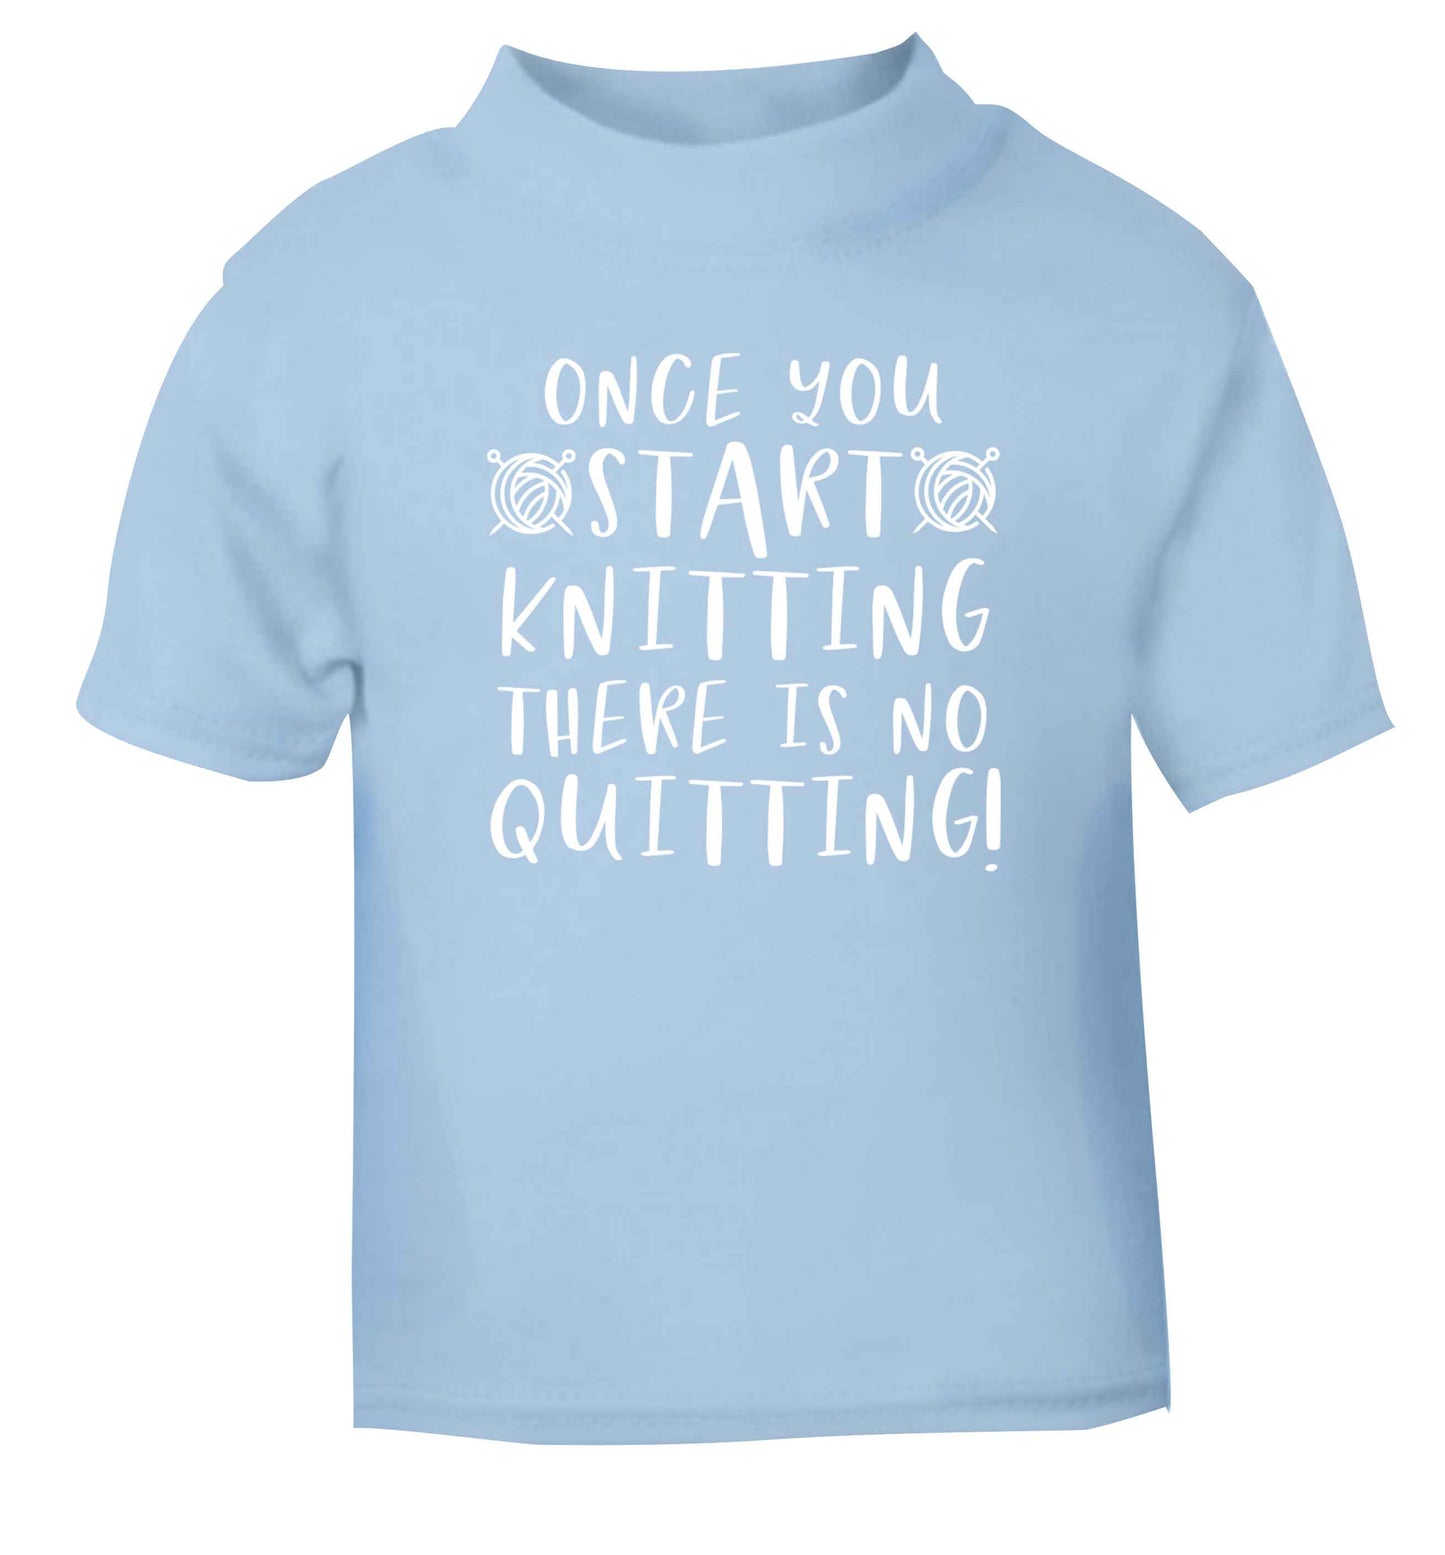 Once you start knitting there is no quitting! light blue Baby Toddler Tshirt 2 Years